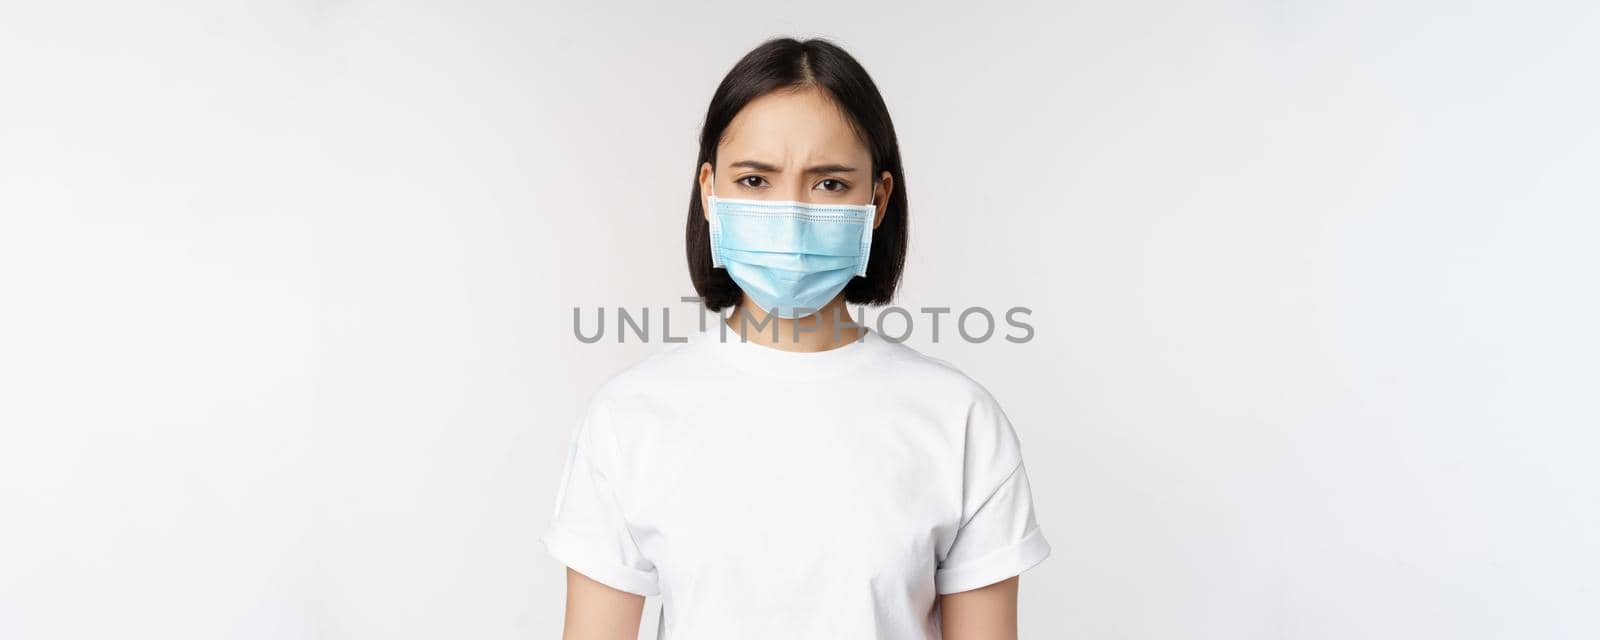 Health and covid pandemic concept. Angry young asian girl in face medical mask, frowning displeased, standing over white background.